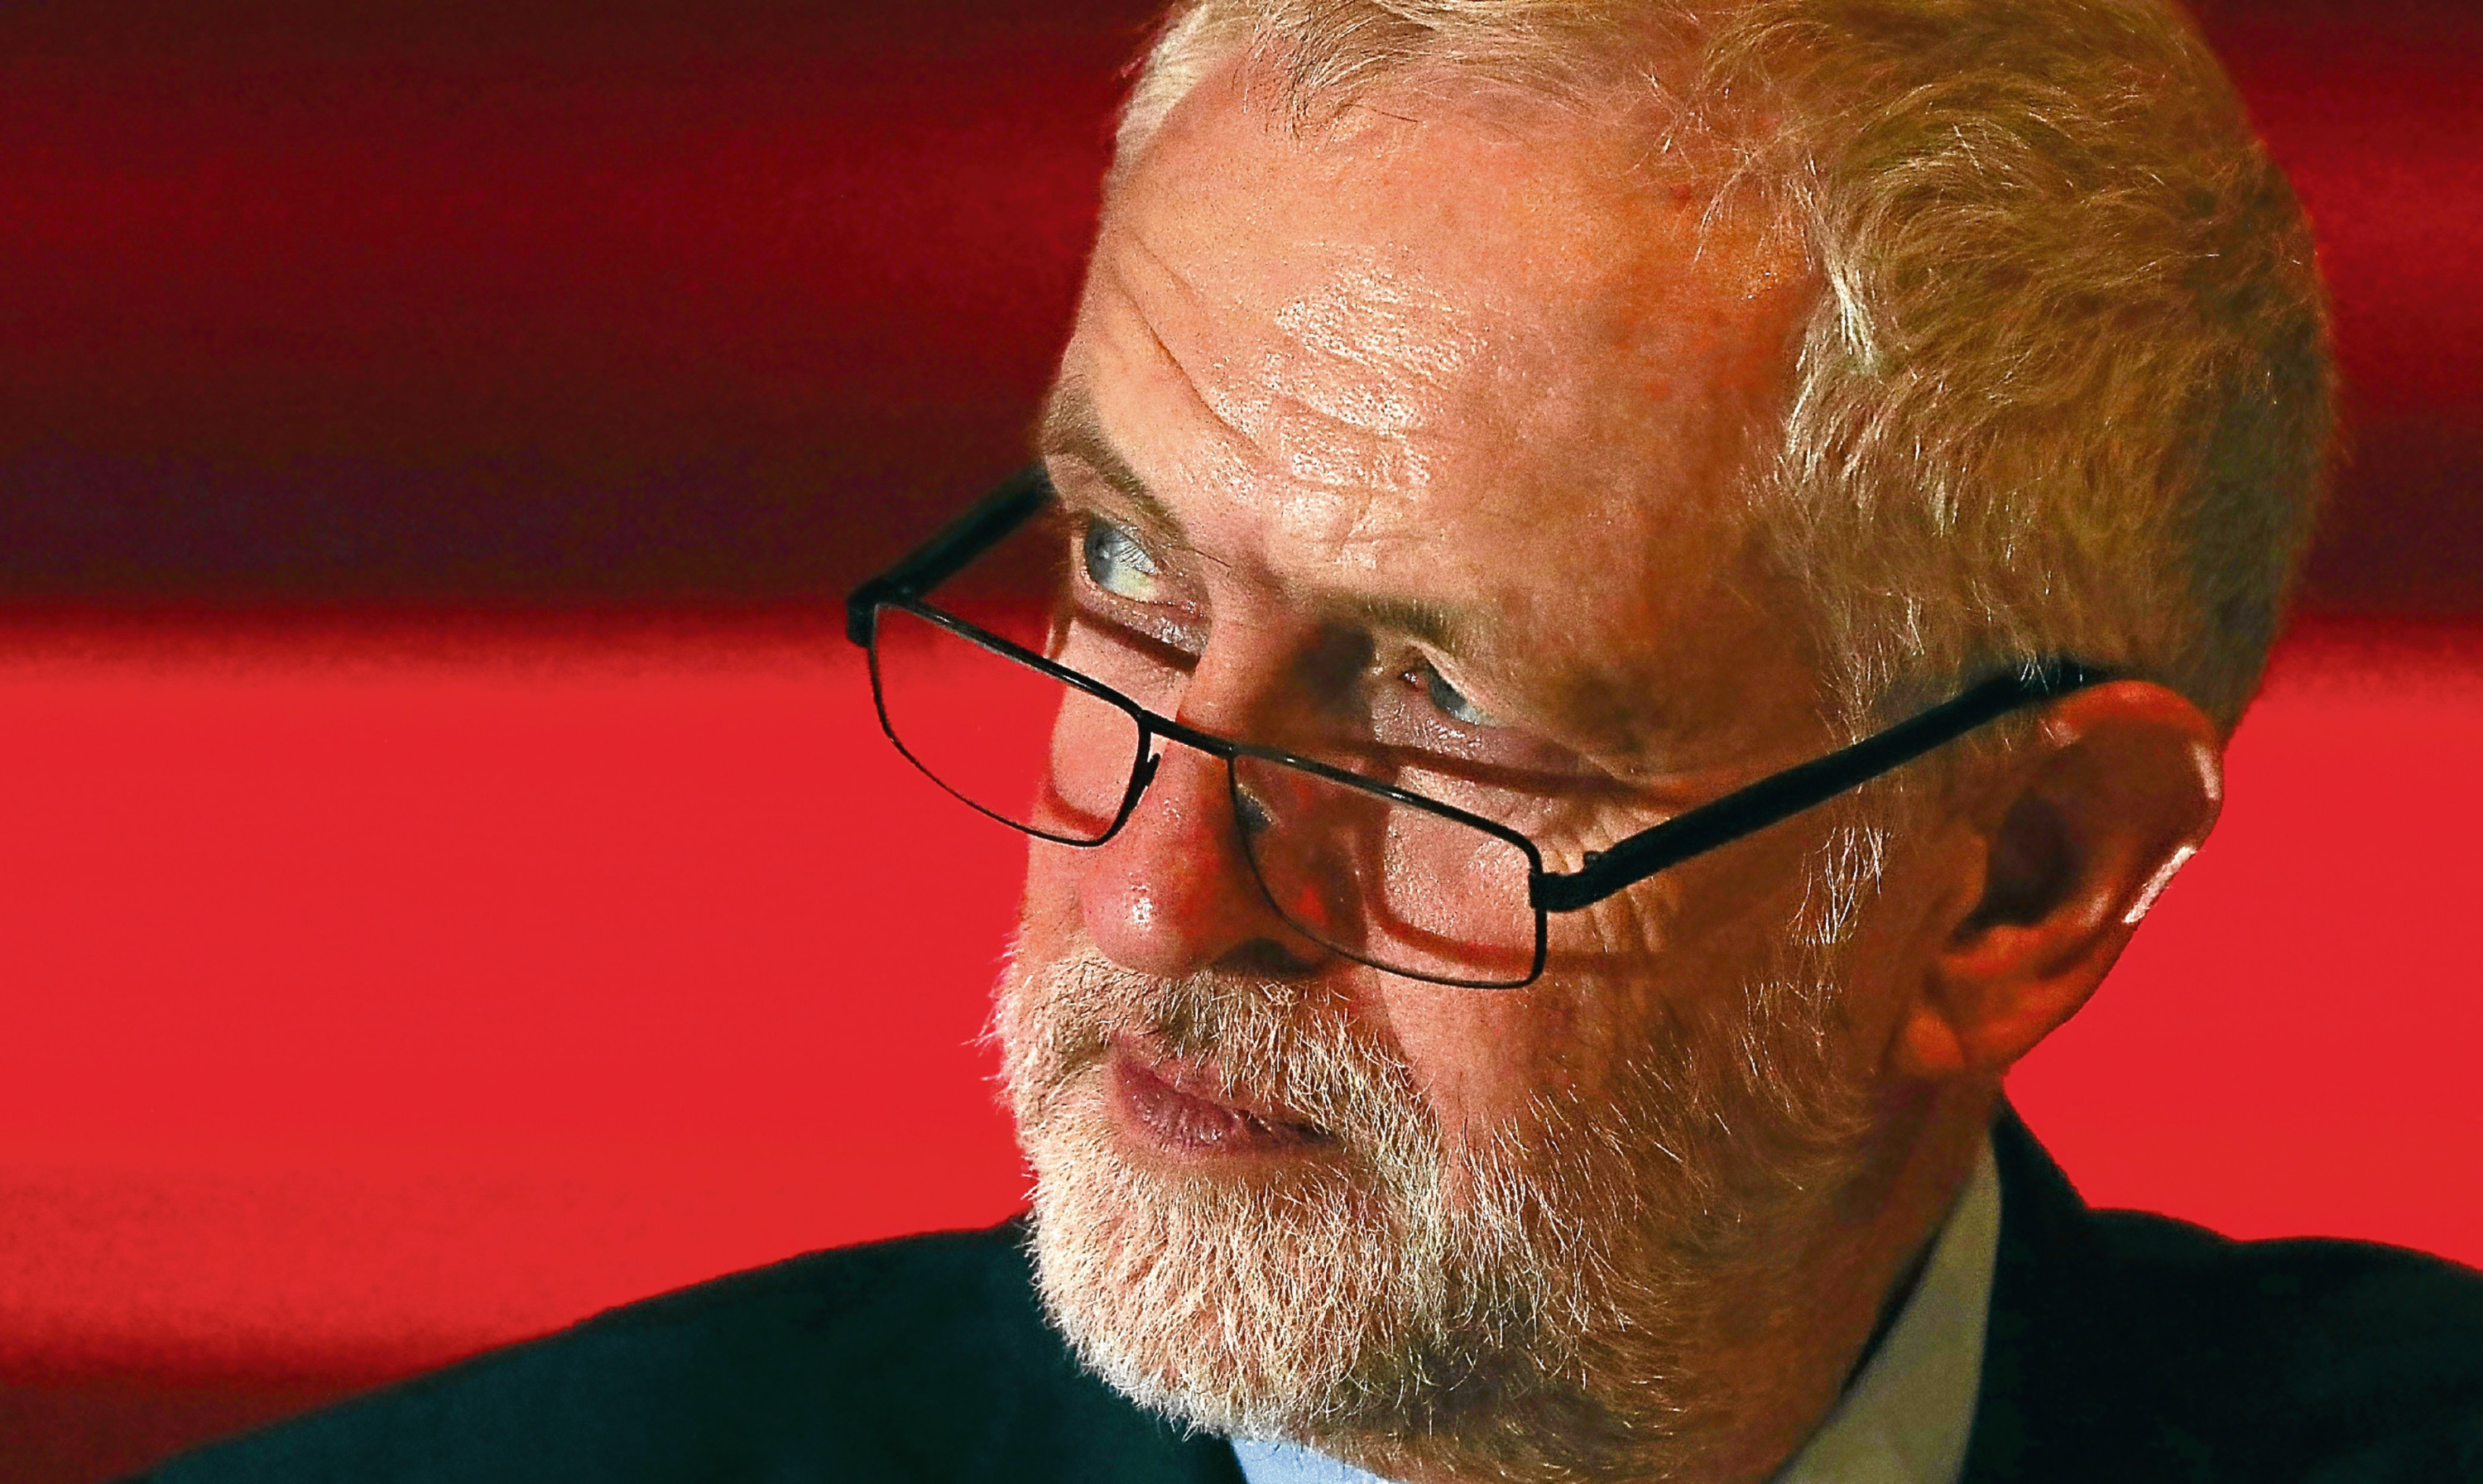 Staring into the abyss? By reelecting Jeremy Corbyn as leader, Labour has made itself unelectable, Jenny says.